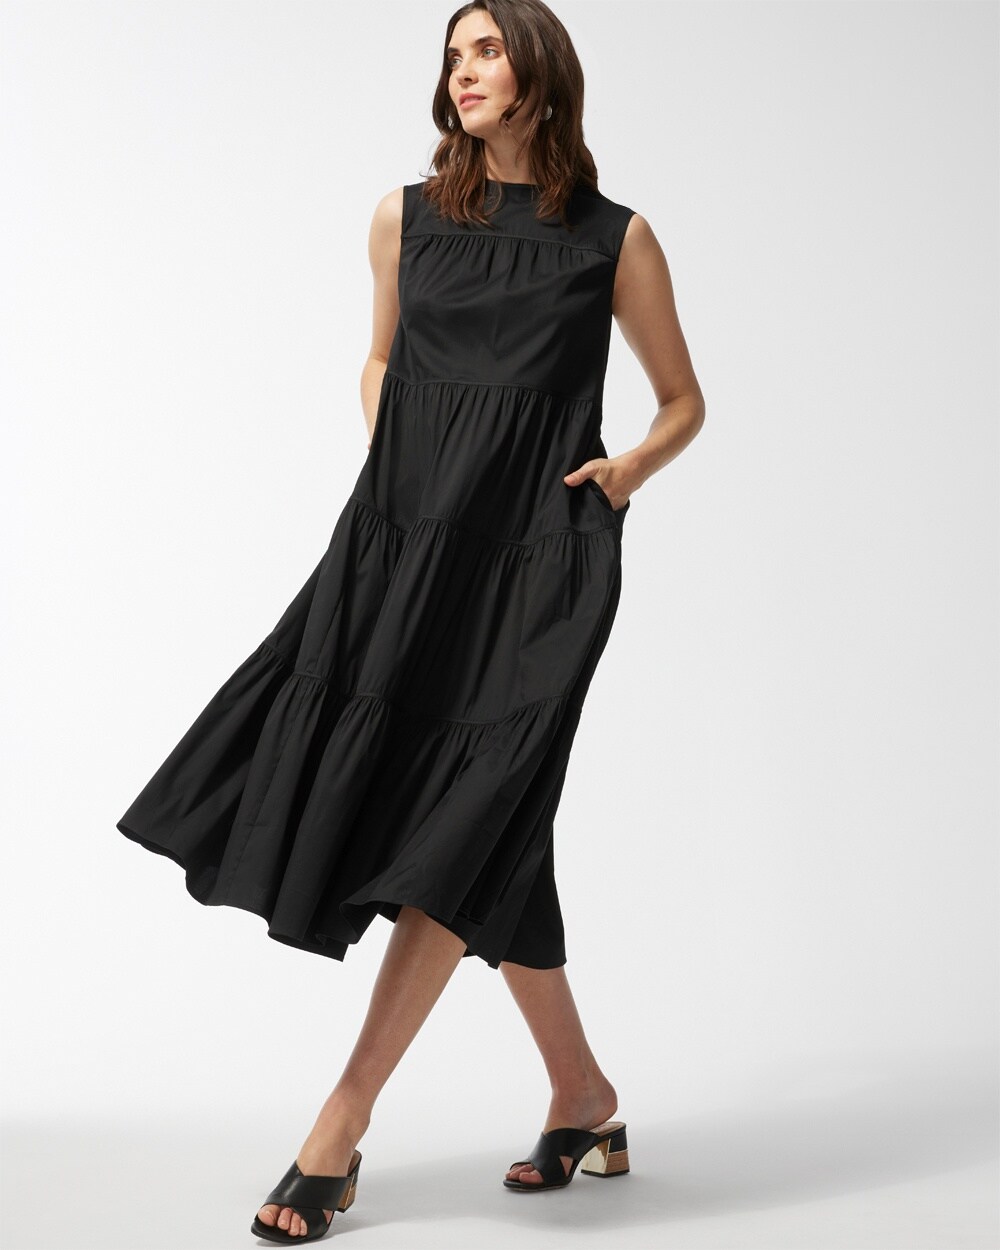 Black Label Poplin Tiered Maxi Dress video preview image, click to start video